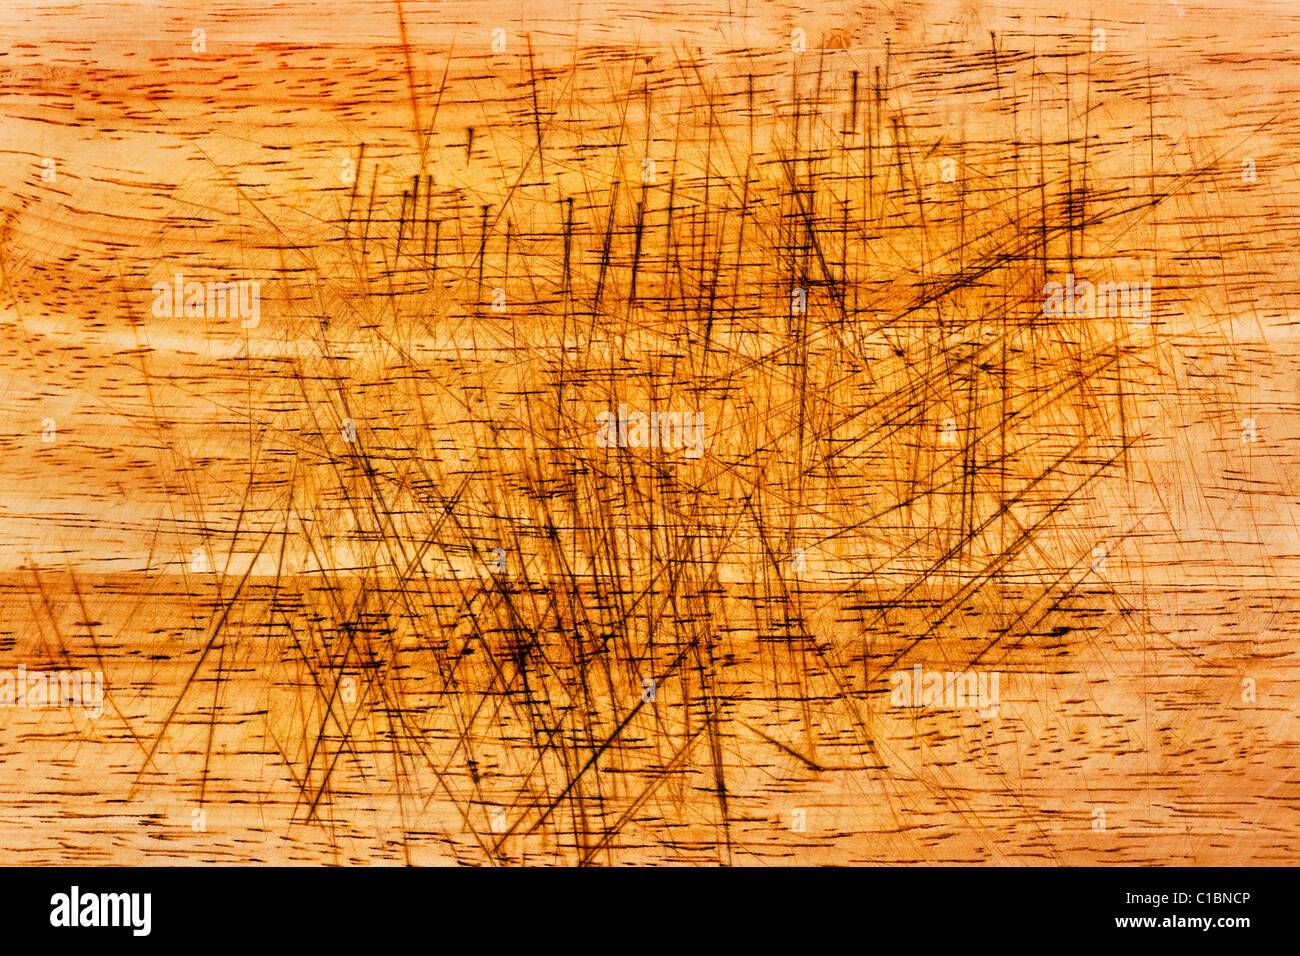 Texture of a severely scarred wood chopping board Stock Photo